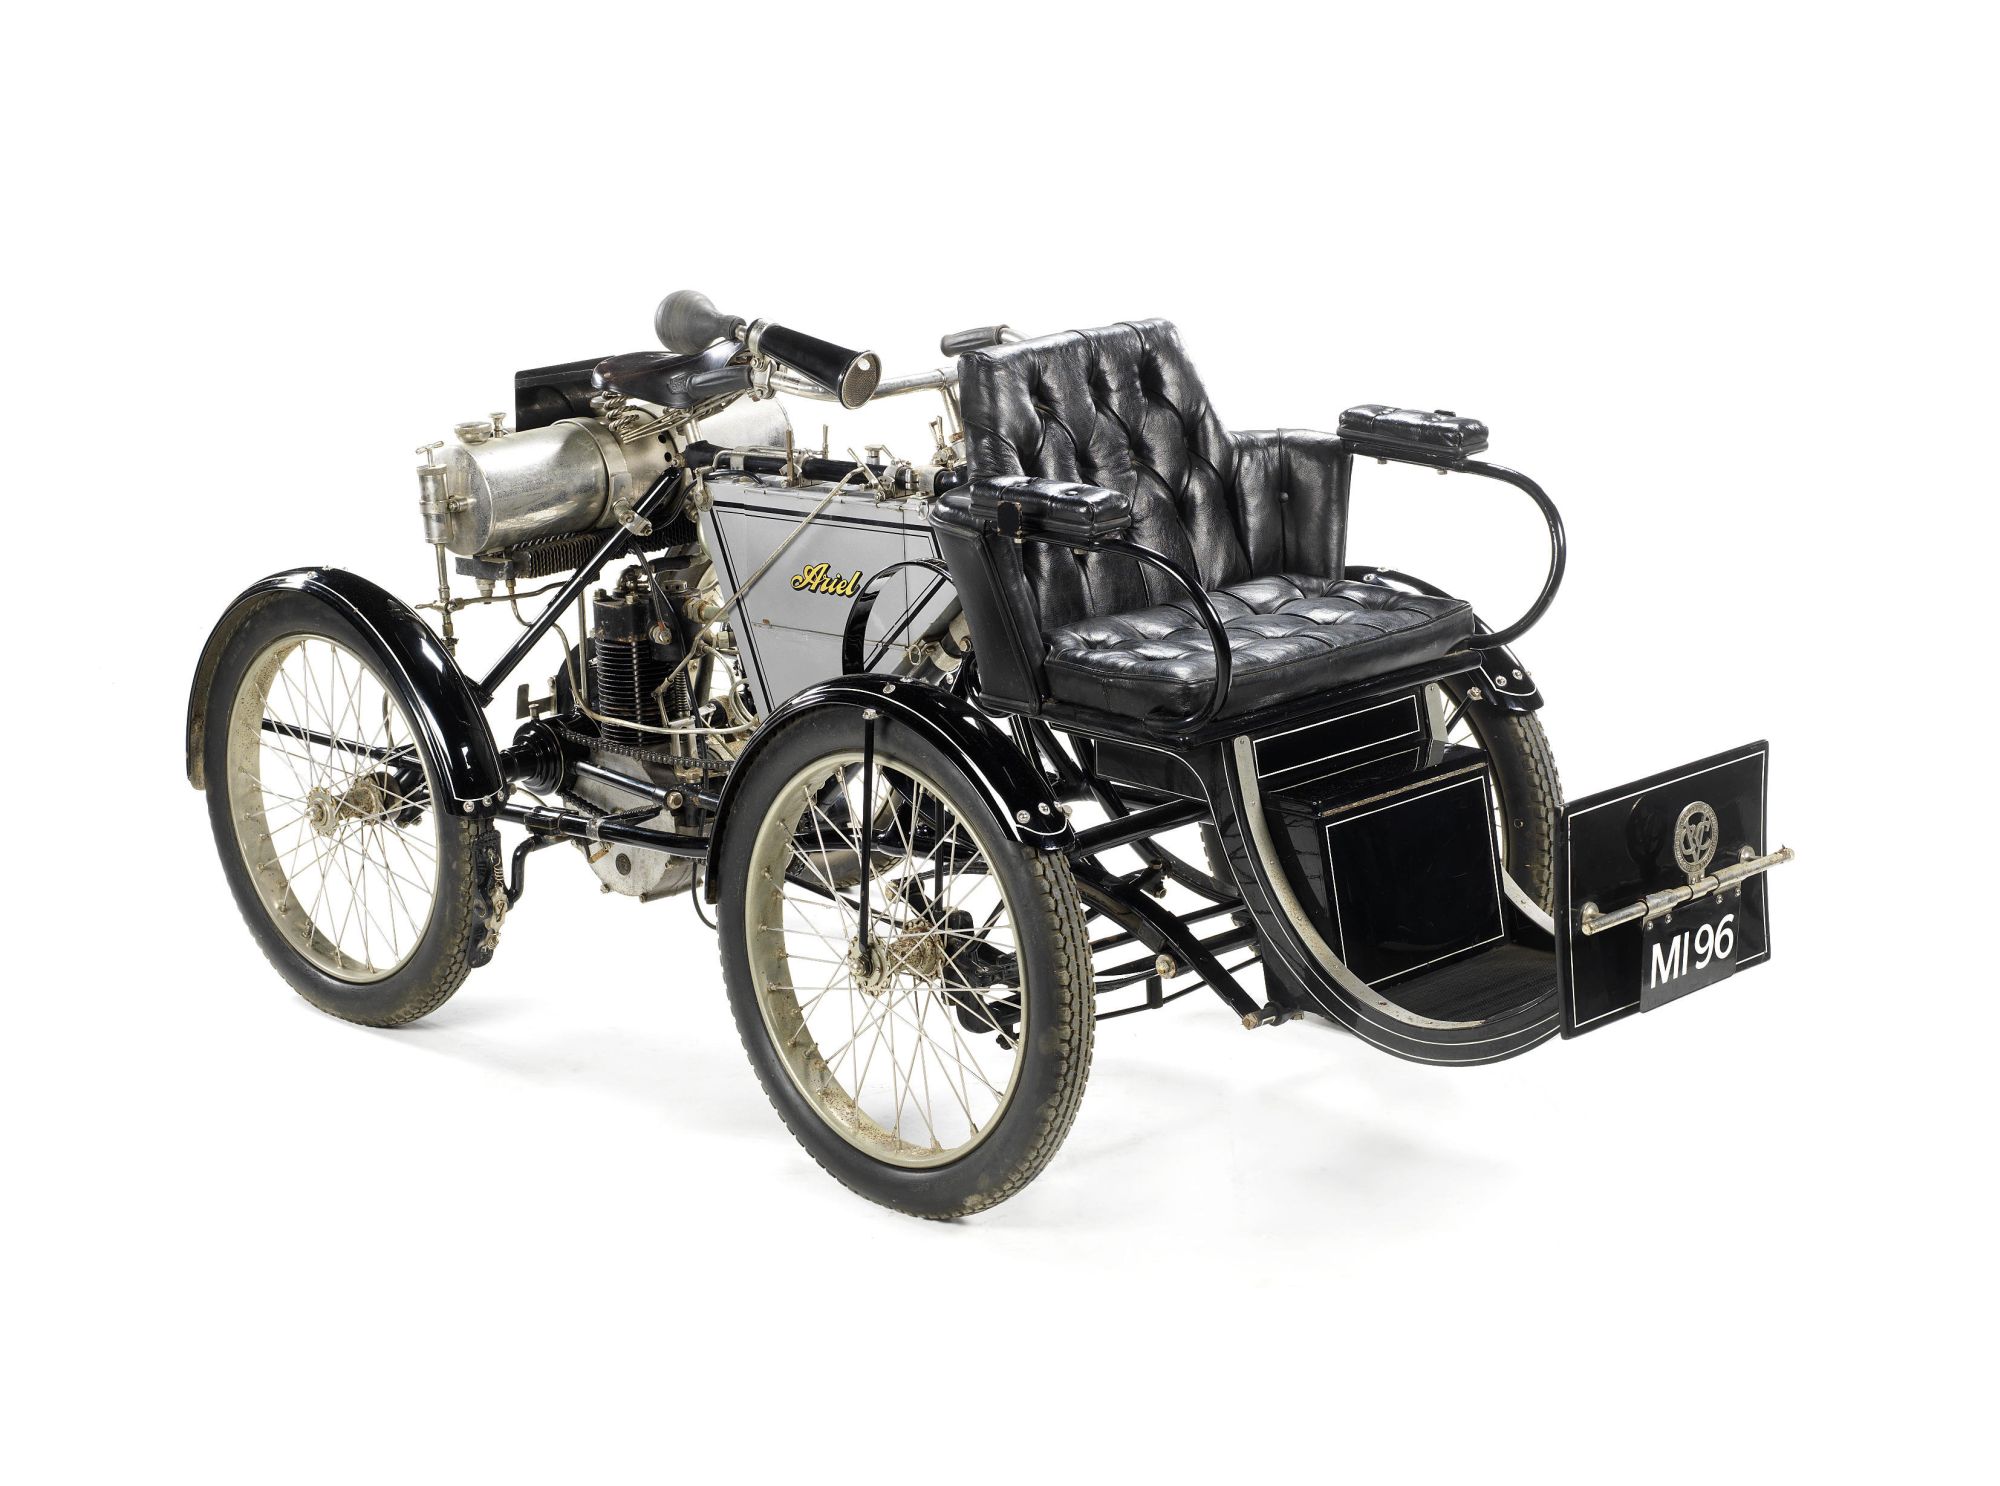 1901 Ariel to be auctioned in the same building it was first sold